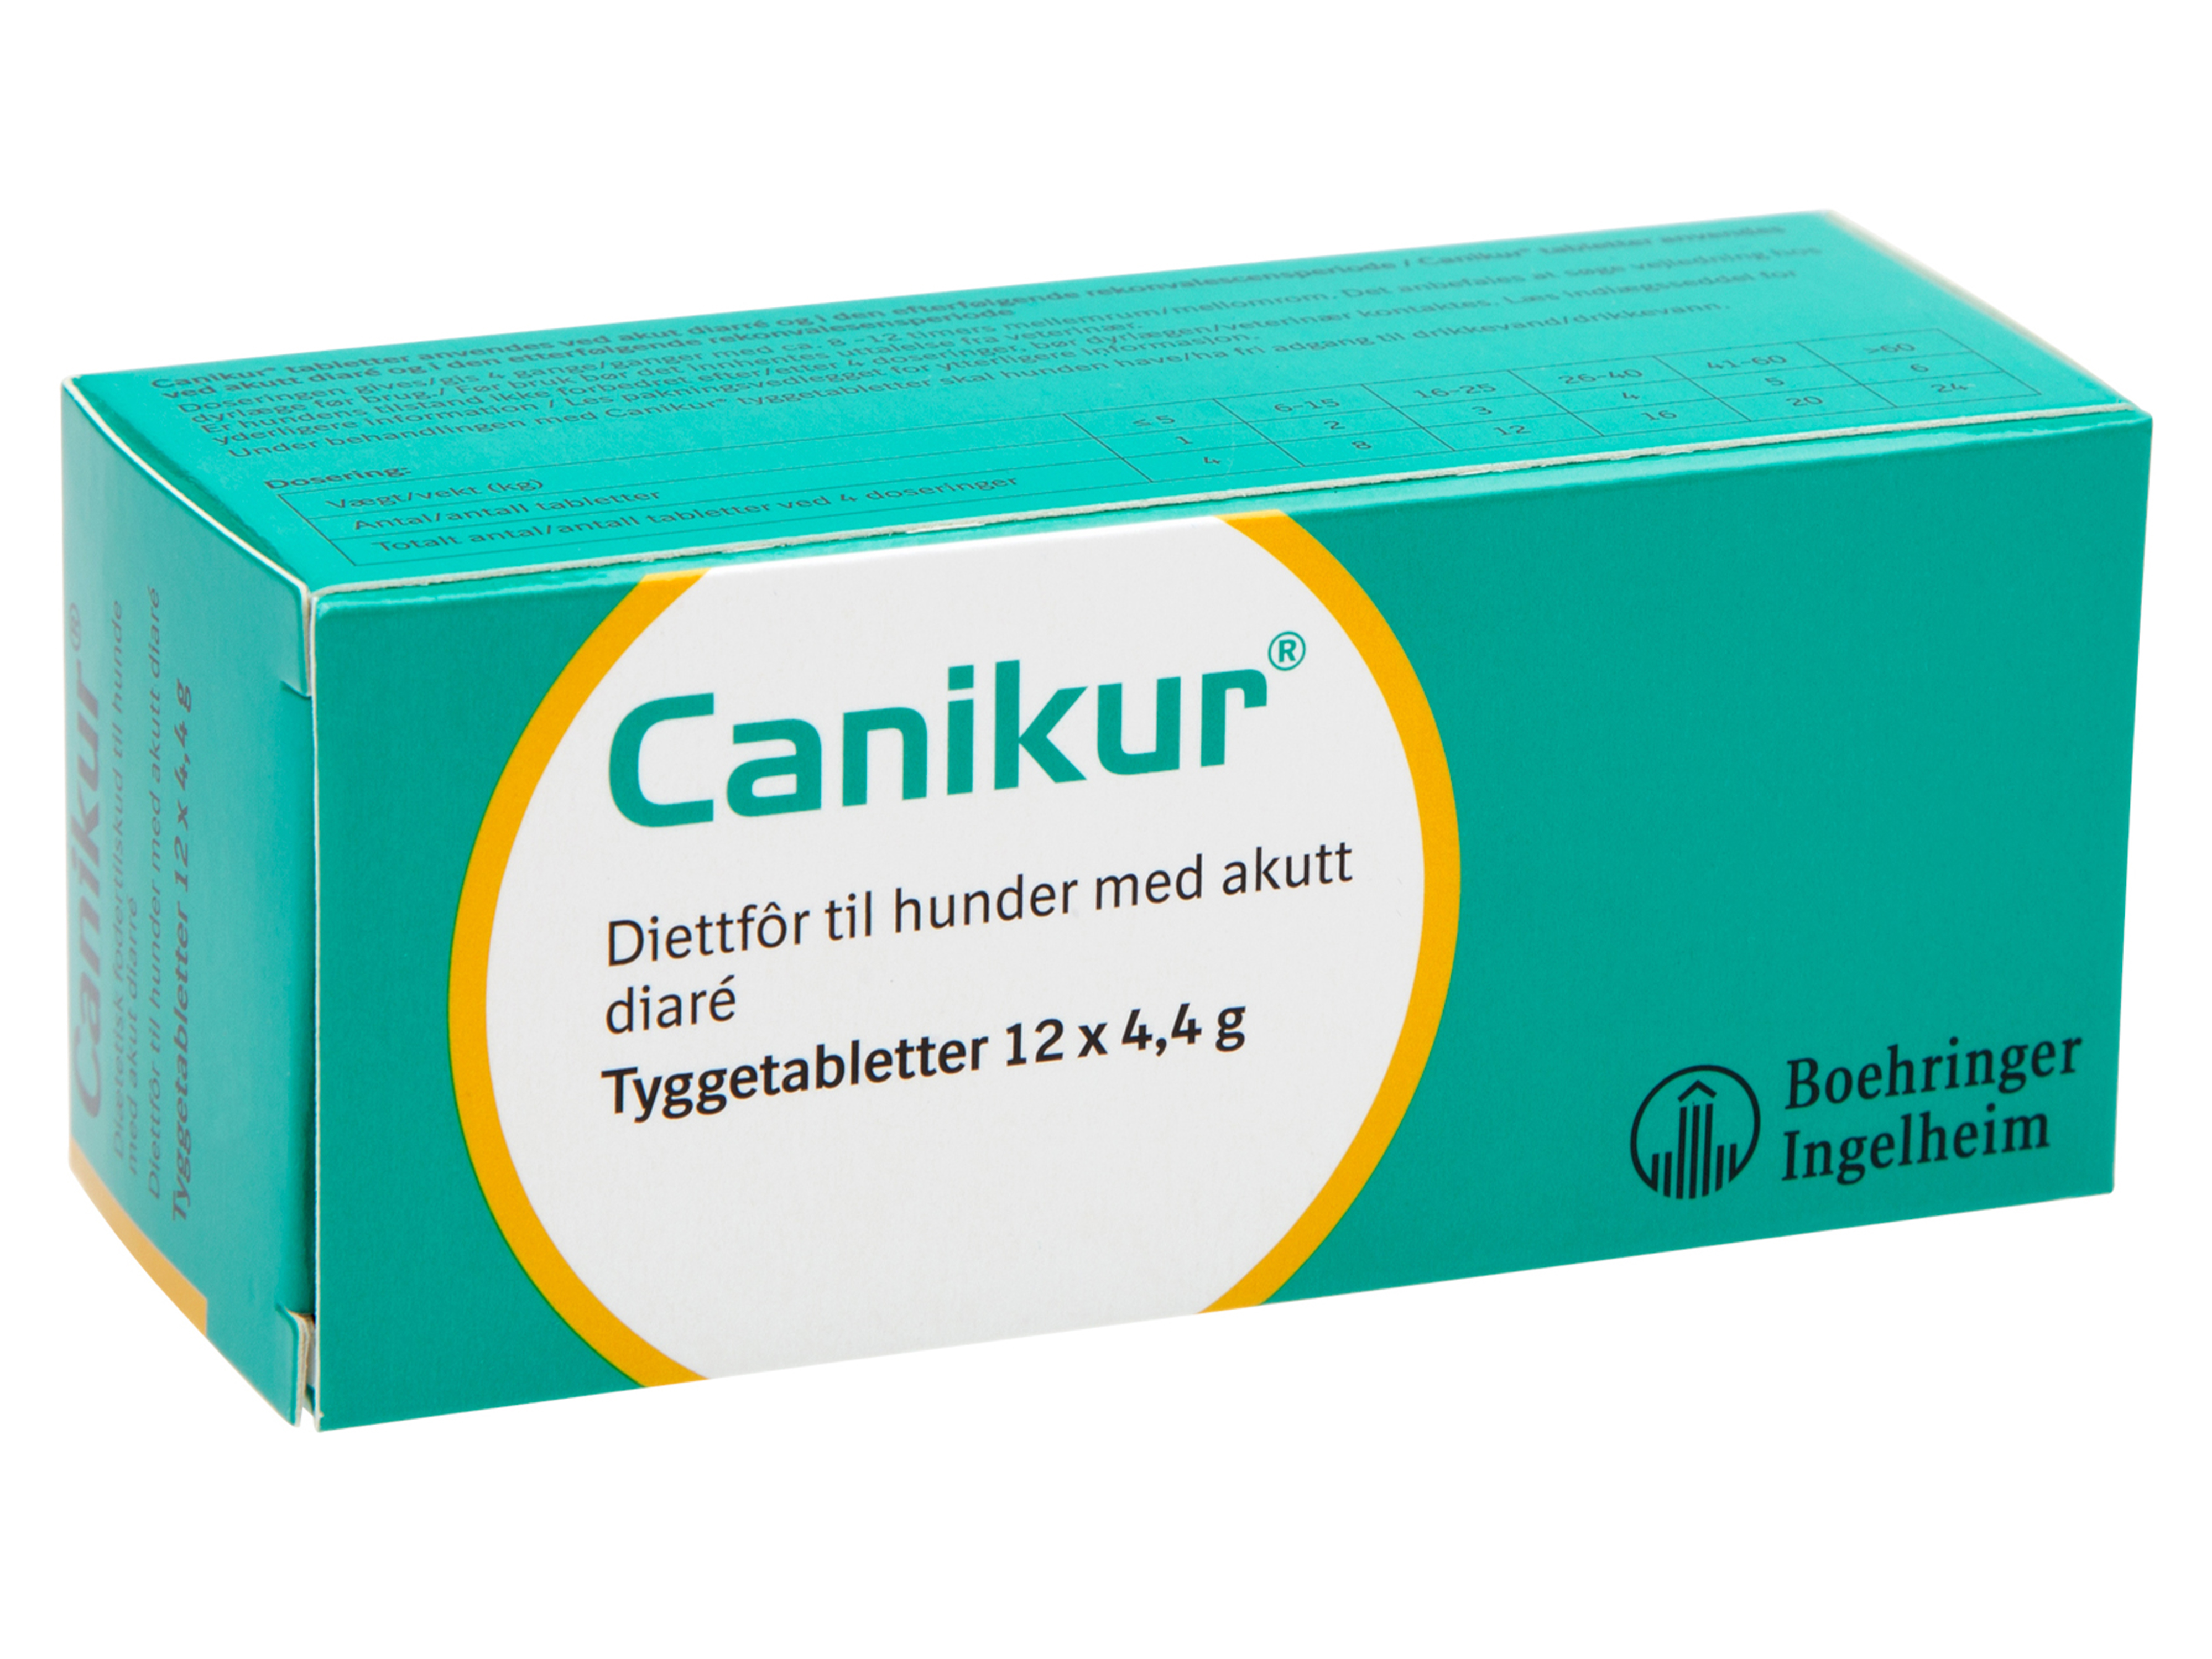 Canikur Tyggetabletter, 12 x 4,4 gram